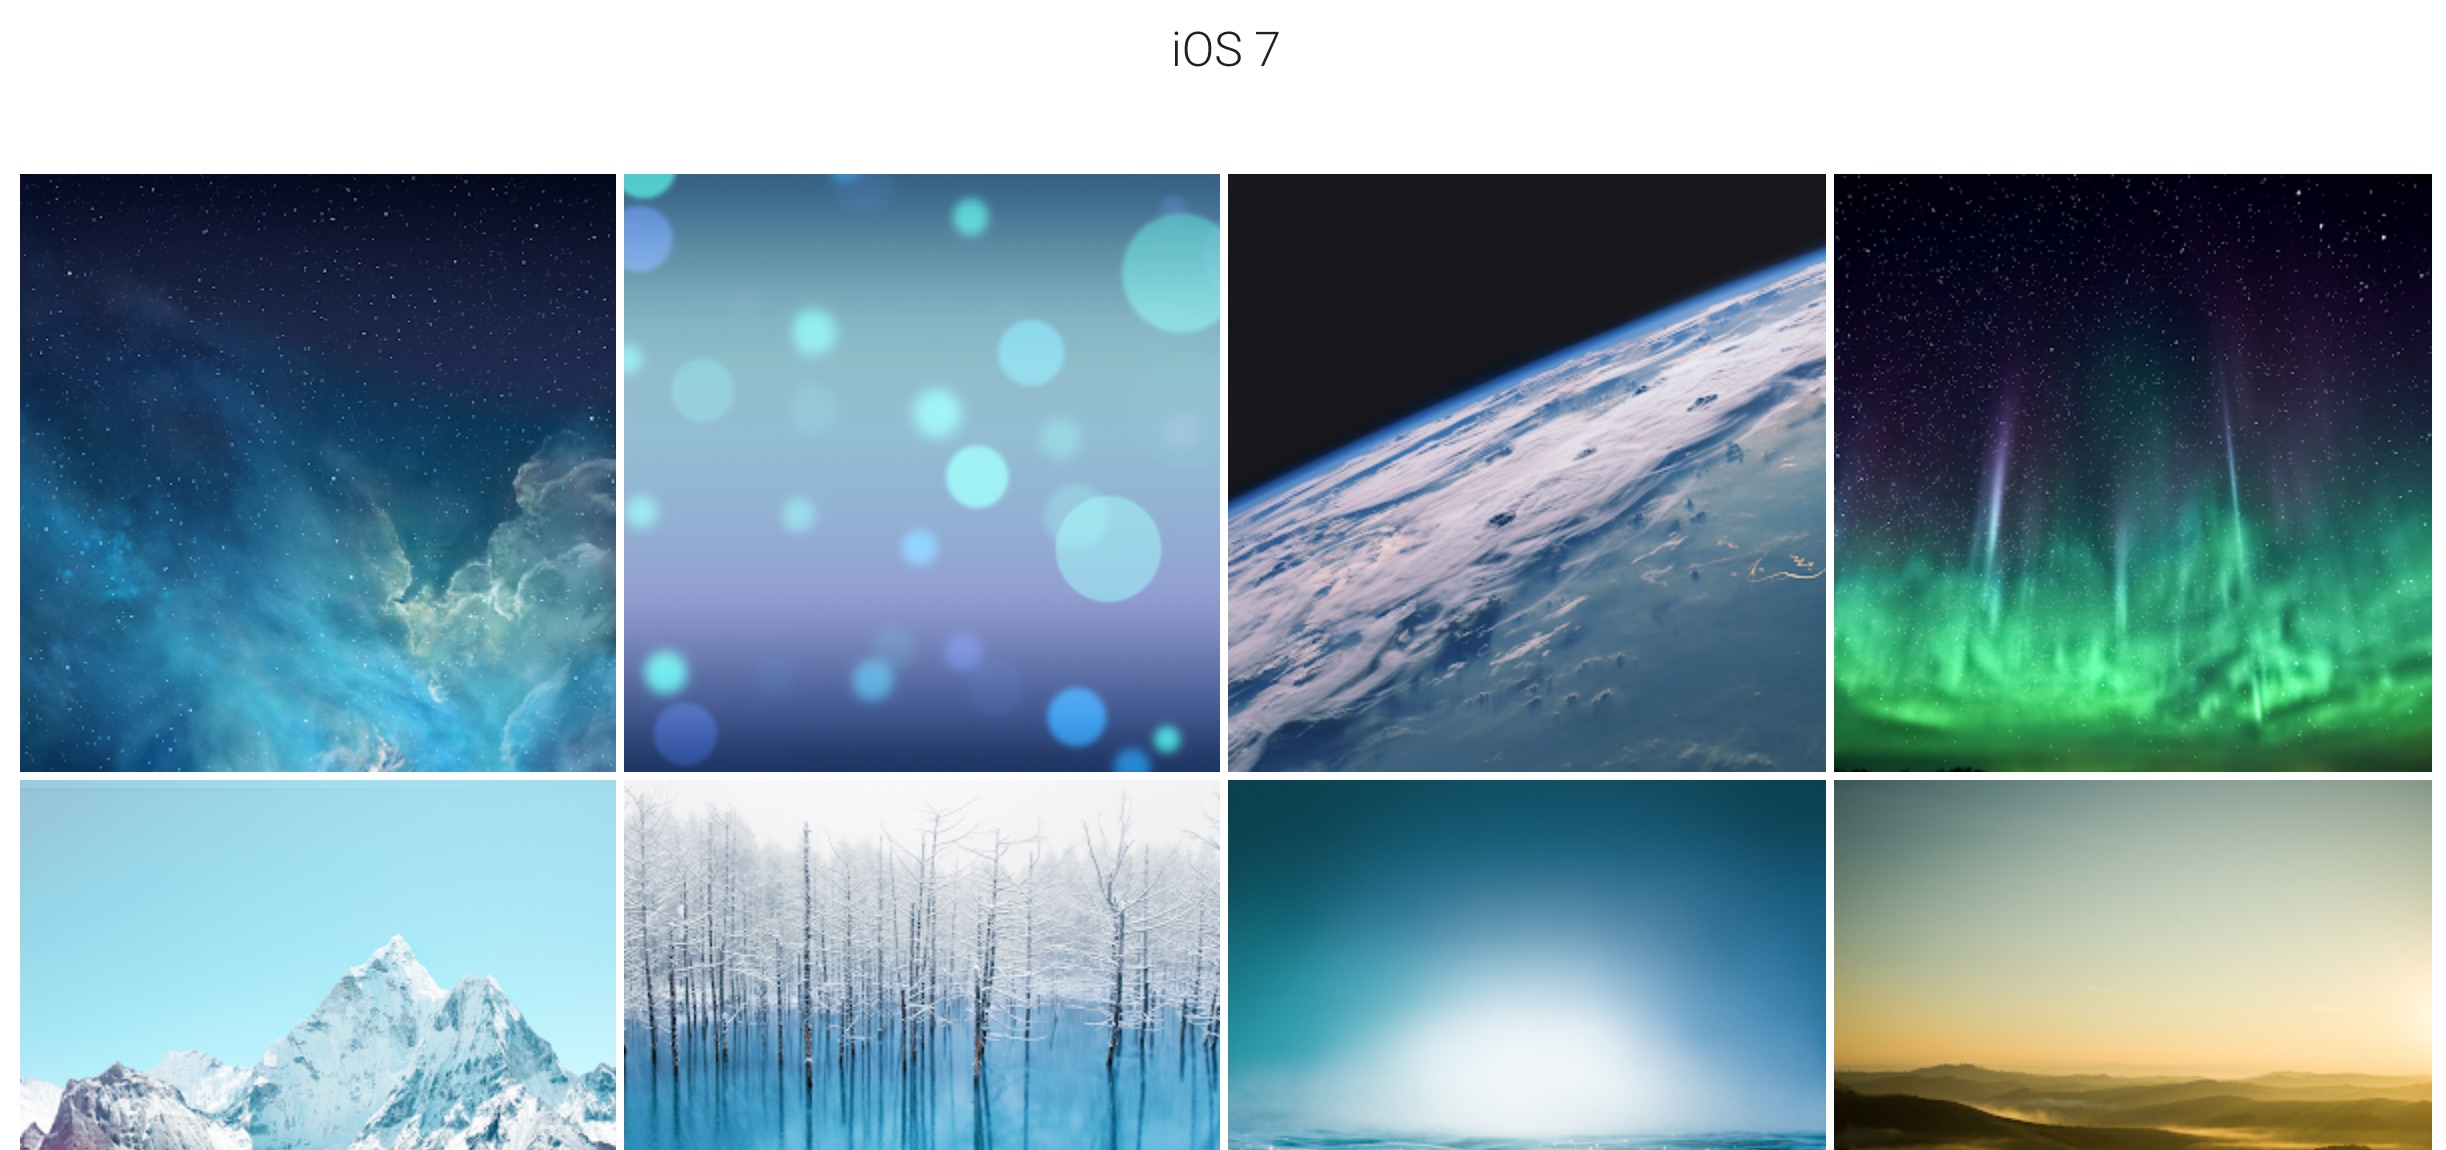 A Comprehensive Collection of Past Official Mac and iOS Wallpapers? Yes, Please!